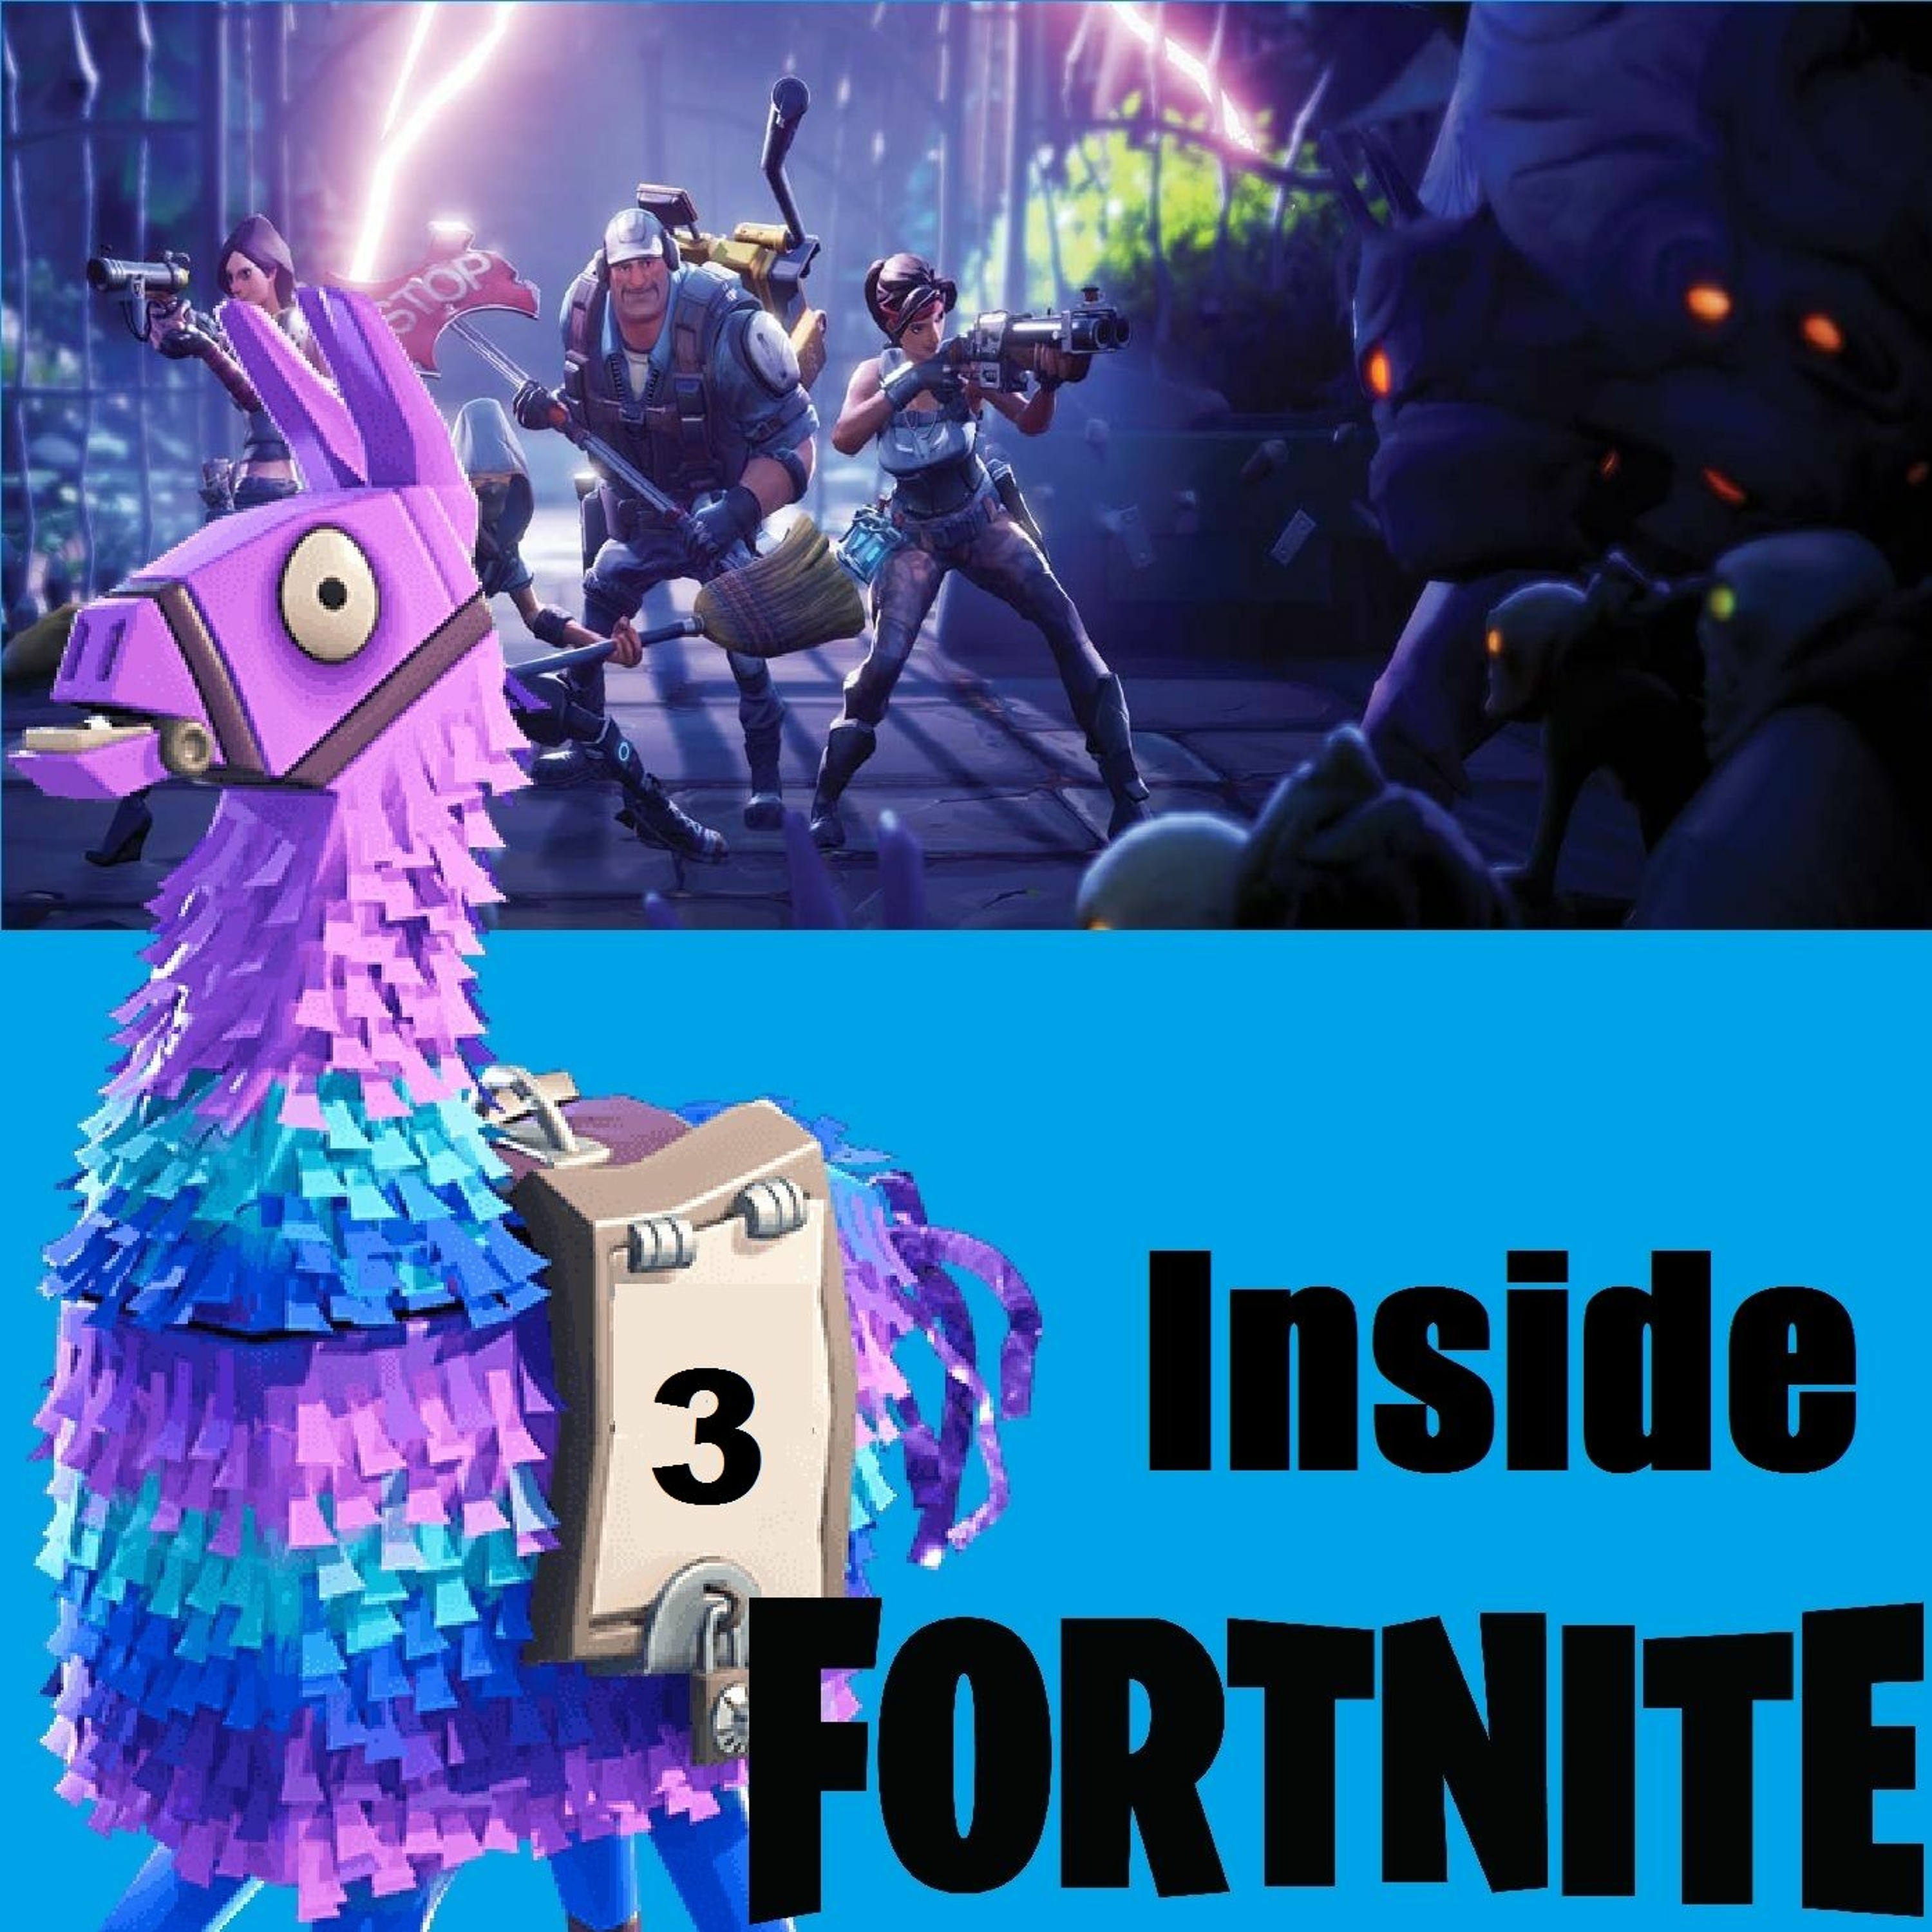 Inside Fortnite 3 - I Urge You To Listen To This One